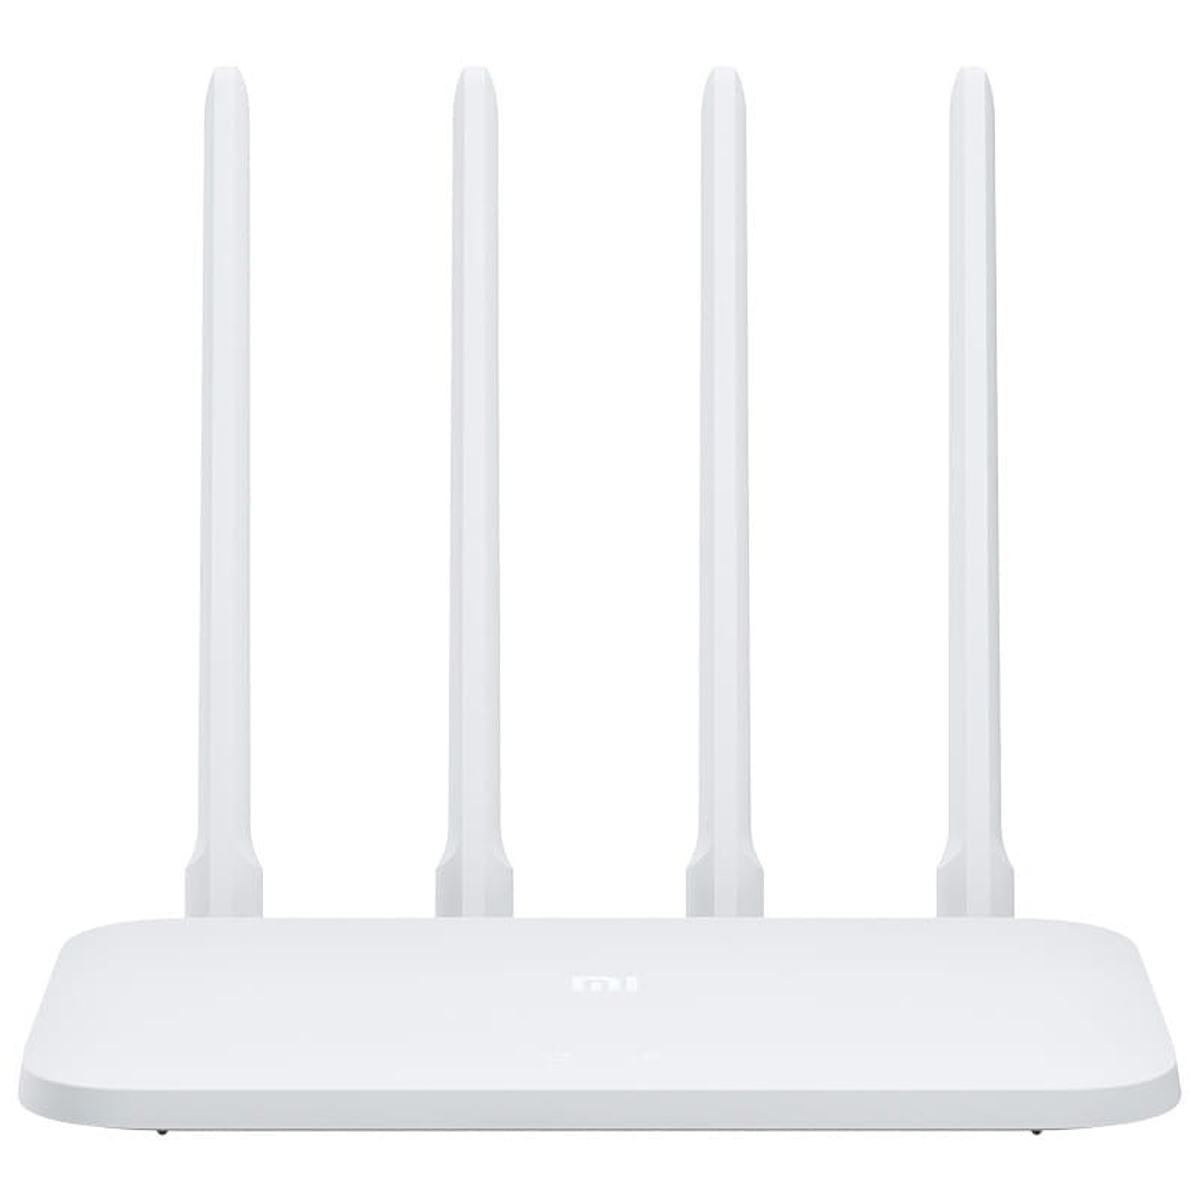 Xiaomi Mi Wifi Router 4C Router N at 300 Mbps